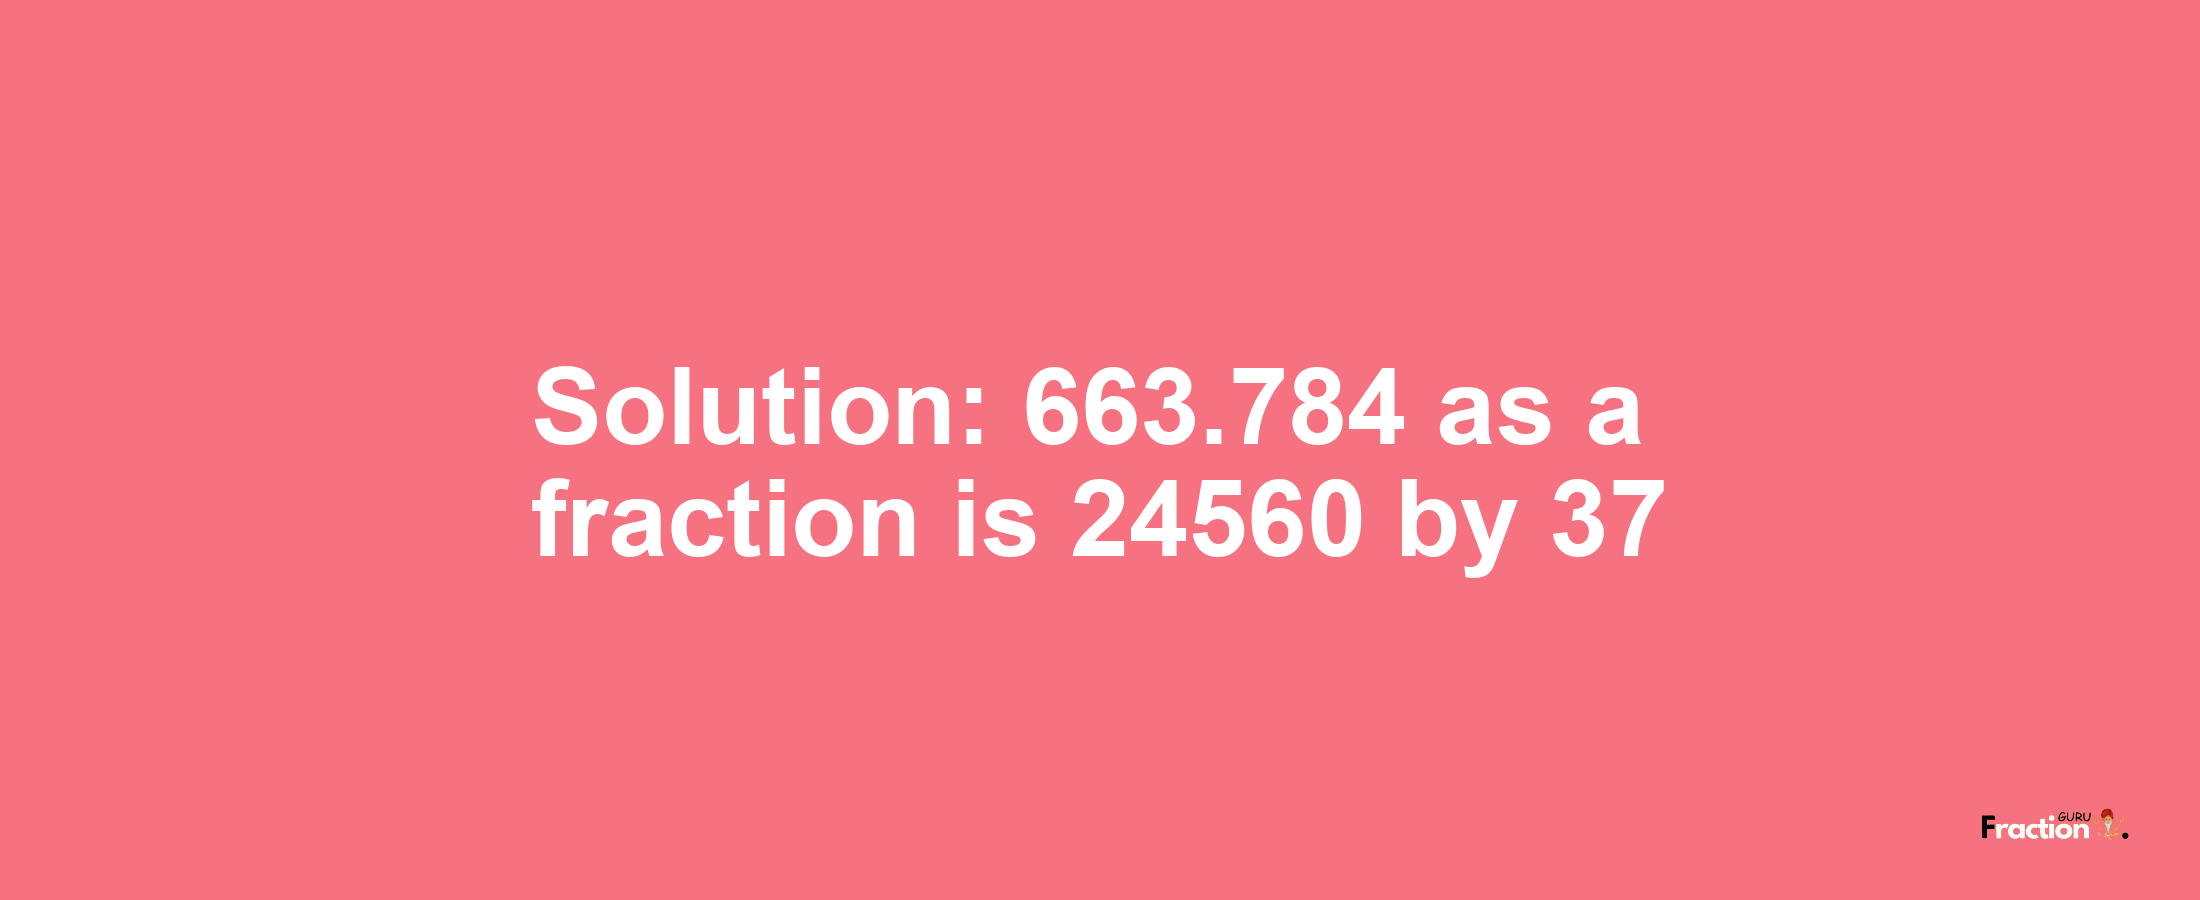 Solution:663.784 as a fraction is 24560/37